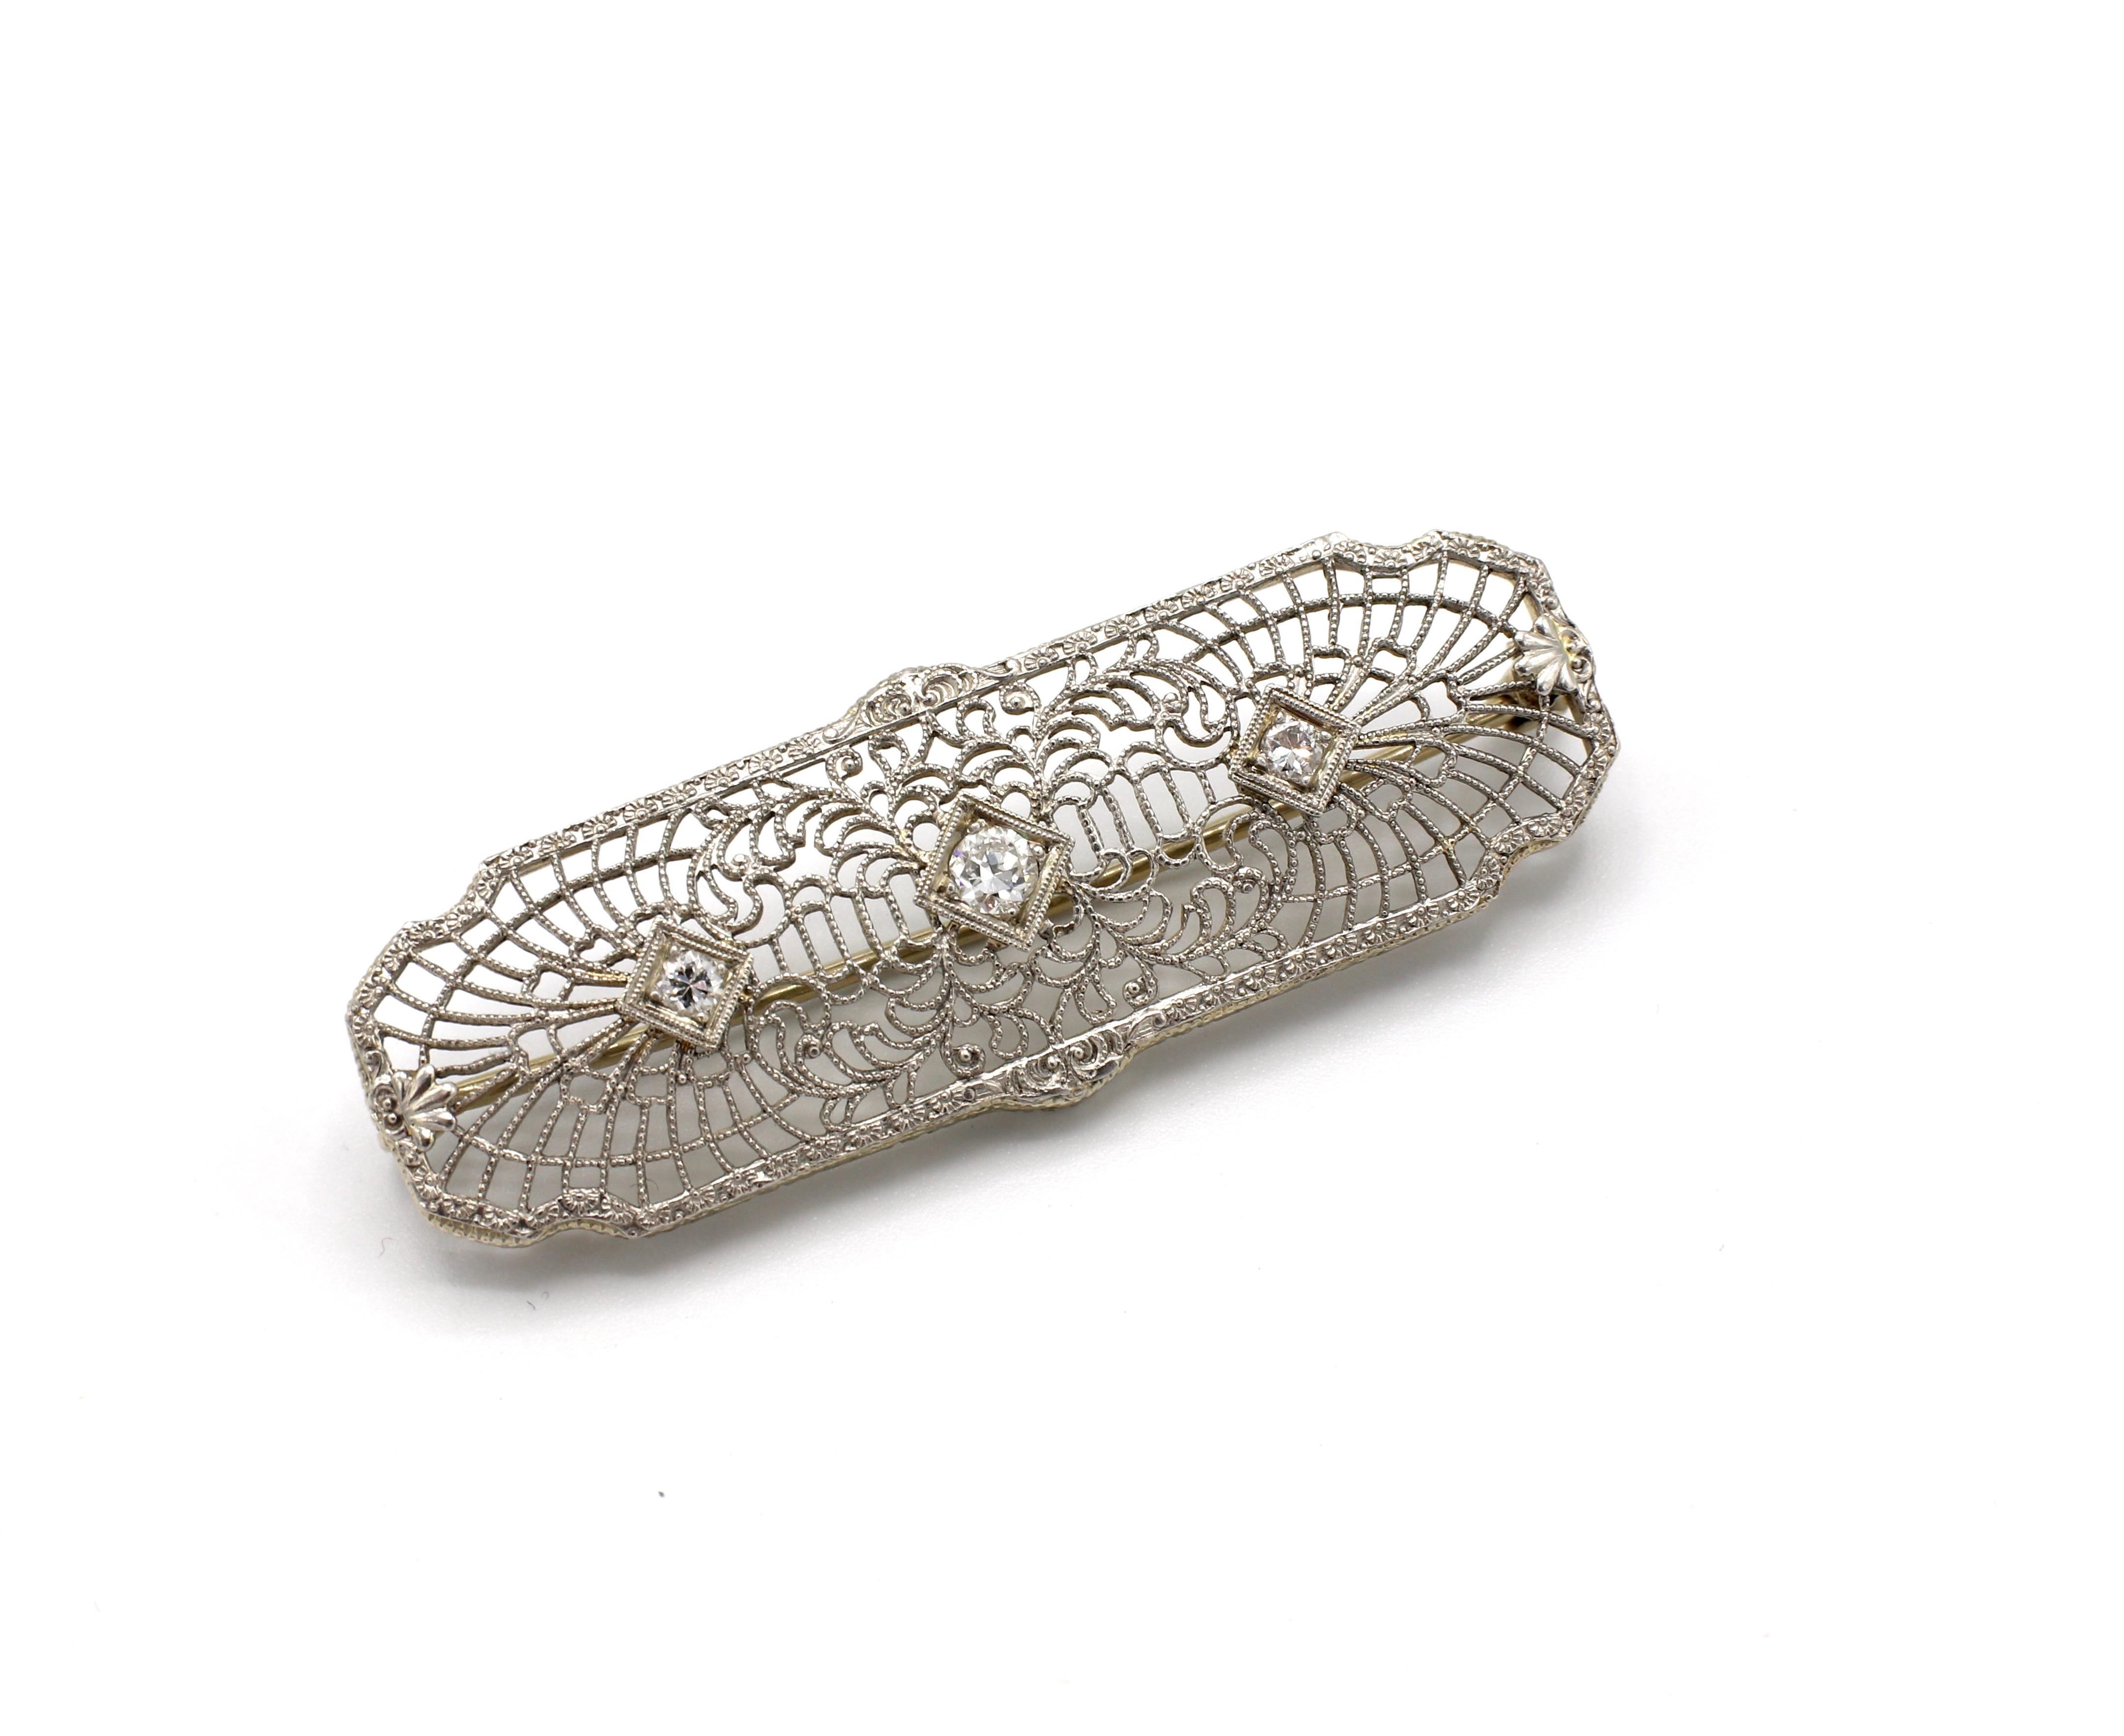 Art Deco 14K Filigree Diamond Bar Pin Brooch 

Metal: 14k gold, marked 14K
Diamonds: 3 transitional cut round diamonds, approx. .20 CTW G-H VS
Weight: 4.88 grams
Length: 1.80 inches
Width: .60 inches
